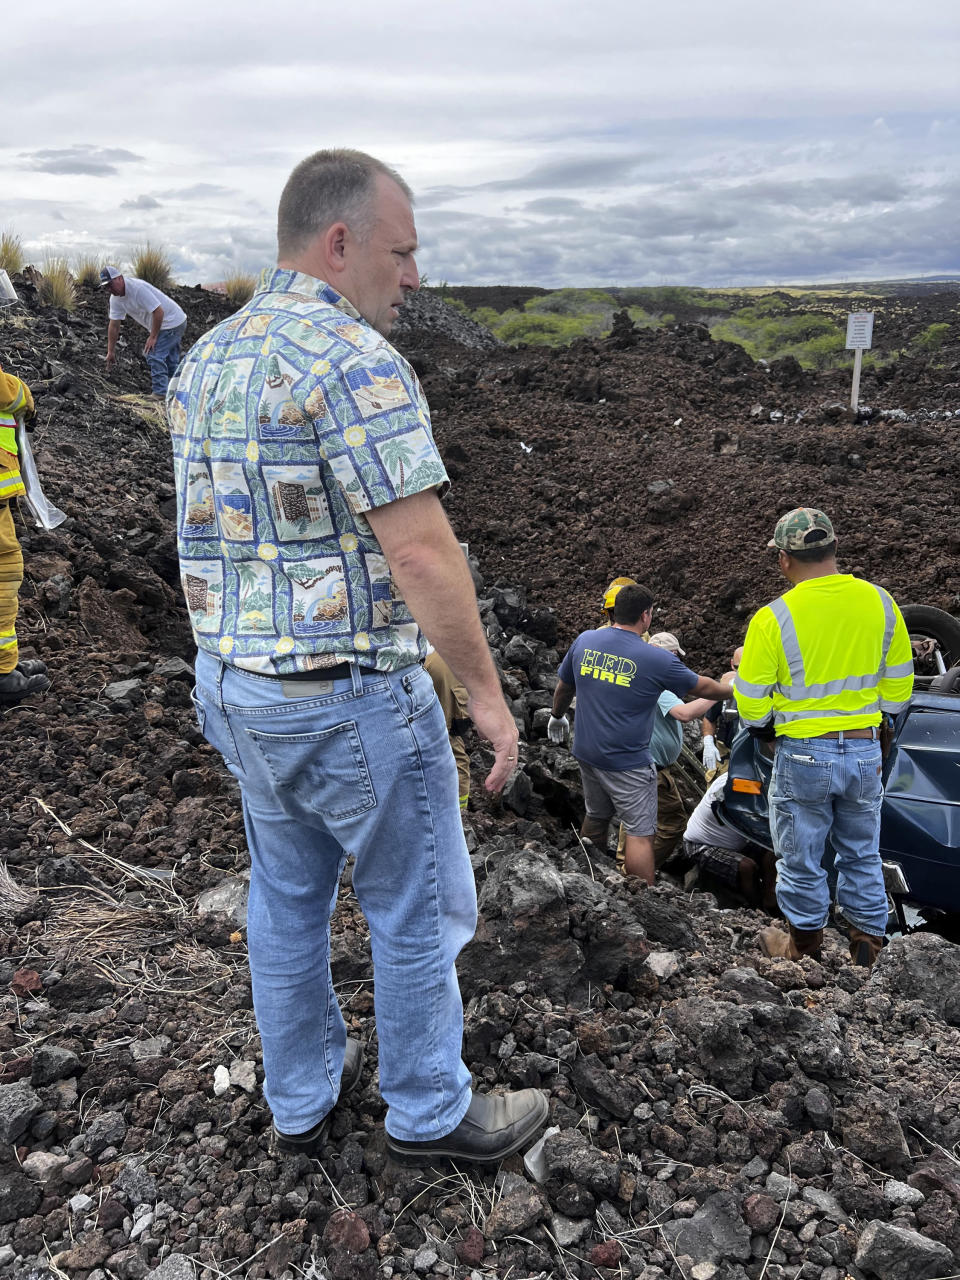 Hawaii Gov. Josh Green, left, looks under a flipped vehicle as he stops to help at the scene of an overturned vehicle in Waikoloa, Hawaii, Thursday, May 18, 2023. Gov. Green, who is also a physician, was one of the people who stopped to help when his security detail spotted a vehicle upside down in a lava field Thursday while en route to a Big Island event. (Reece Kainoa Kilbey/Office of the Governor, State of Hawai'i via AP)